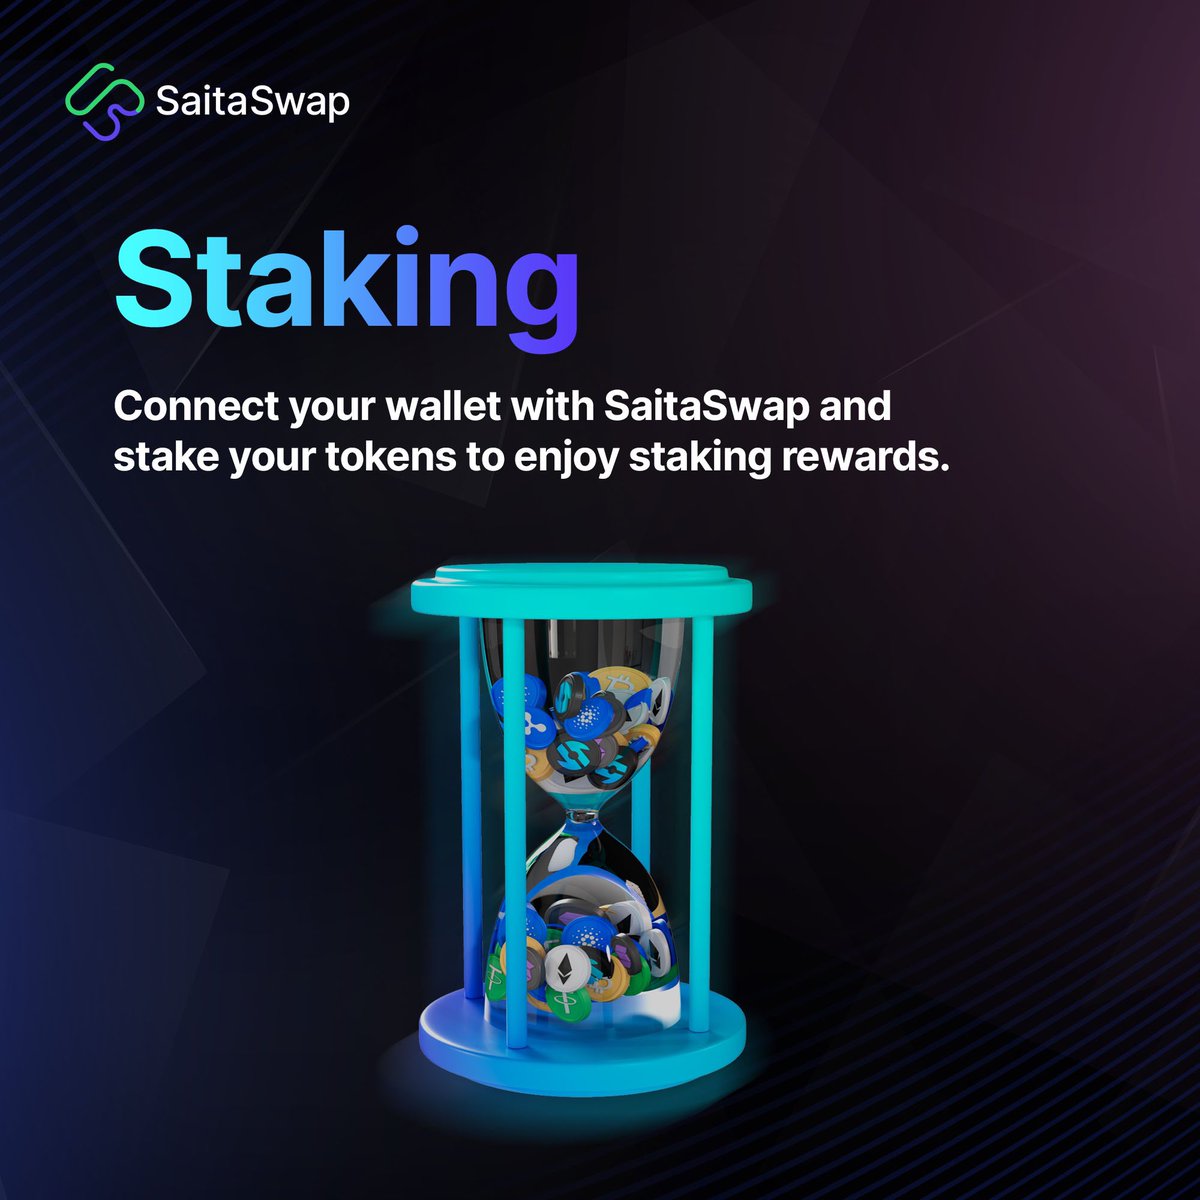 The best trading opportunities come to those who use SaitaSwap ⚡️💪🏼 Visit dex.saitachain.com to explore the world of seamless and secure trading and token swaps, from liquidity to staking and a lot more. 🚀 #SaitaChain #Swapping #CrossChain #Staking #Trading #Crypto